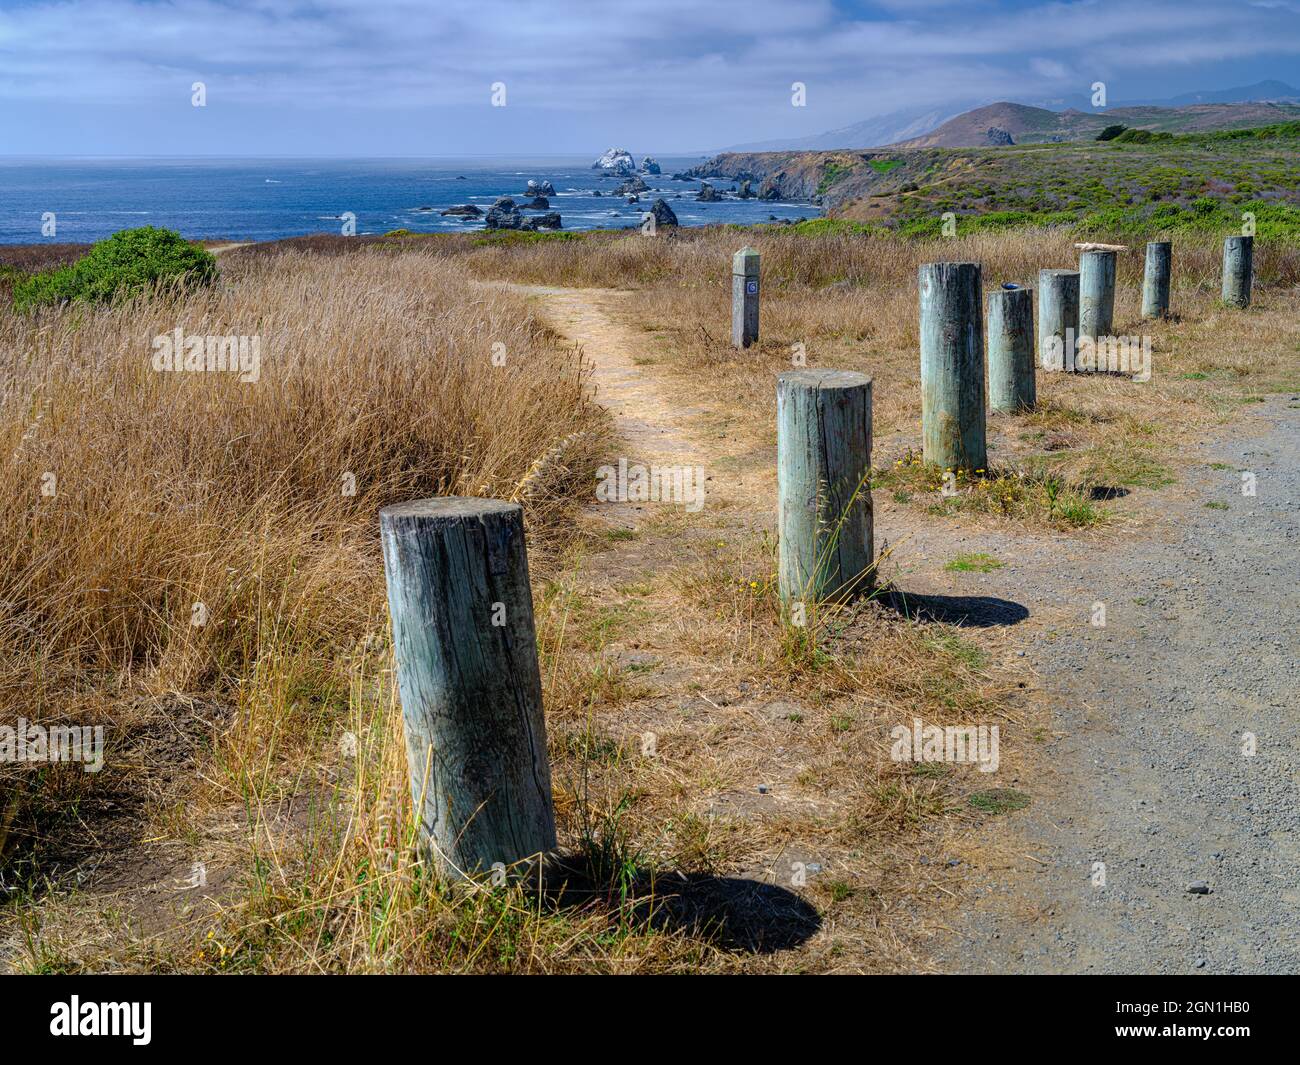 This is the ineffable Bodega Bay Area, miles and miles of quiet beaches with an ethereal and beautiful appeal. Stock Photo